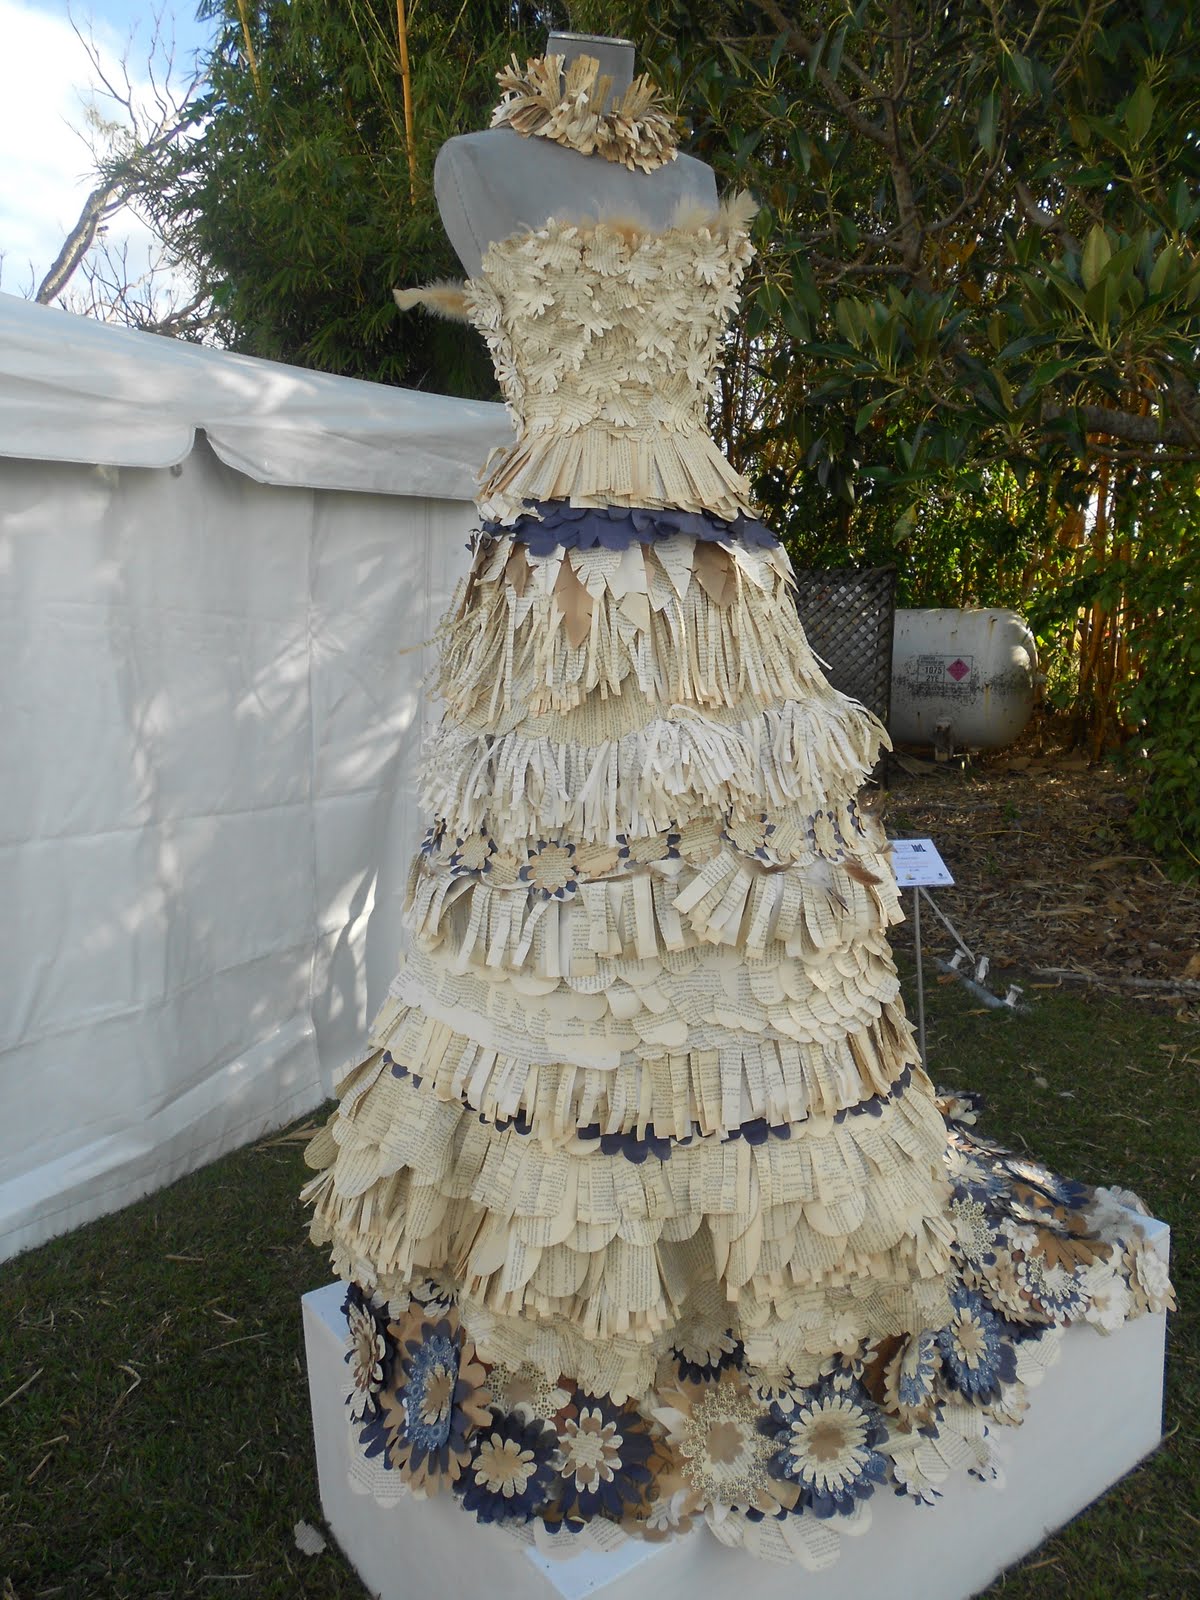 Back to the castle: Researching paper dresses